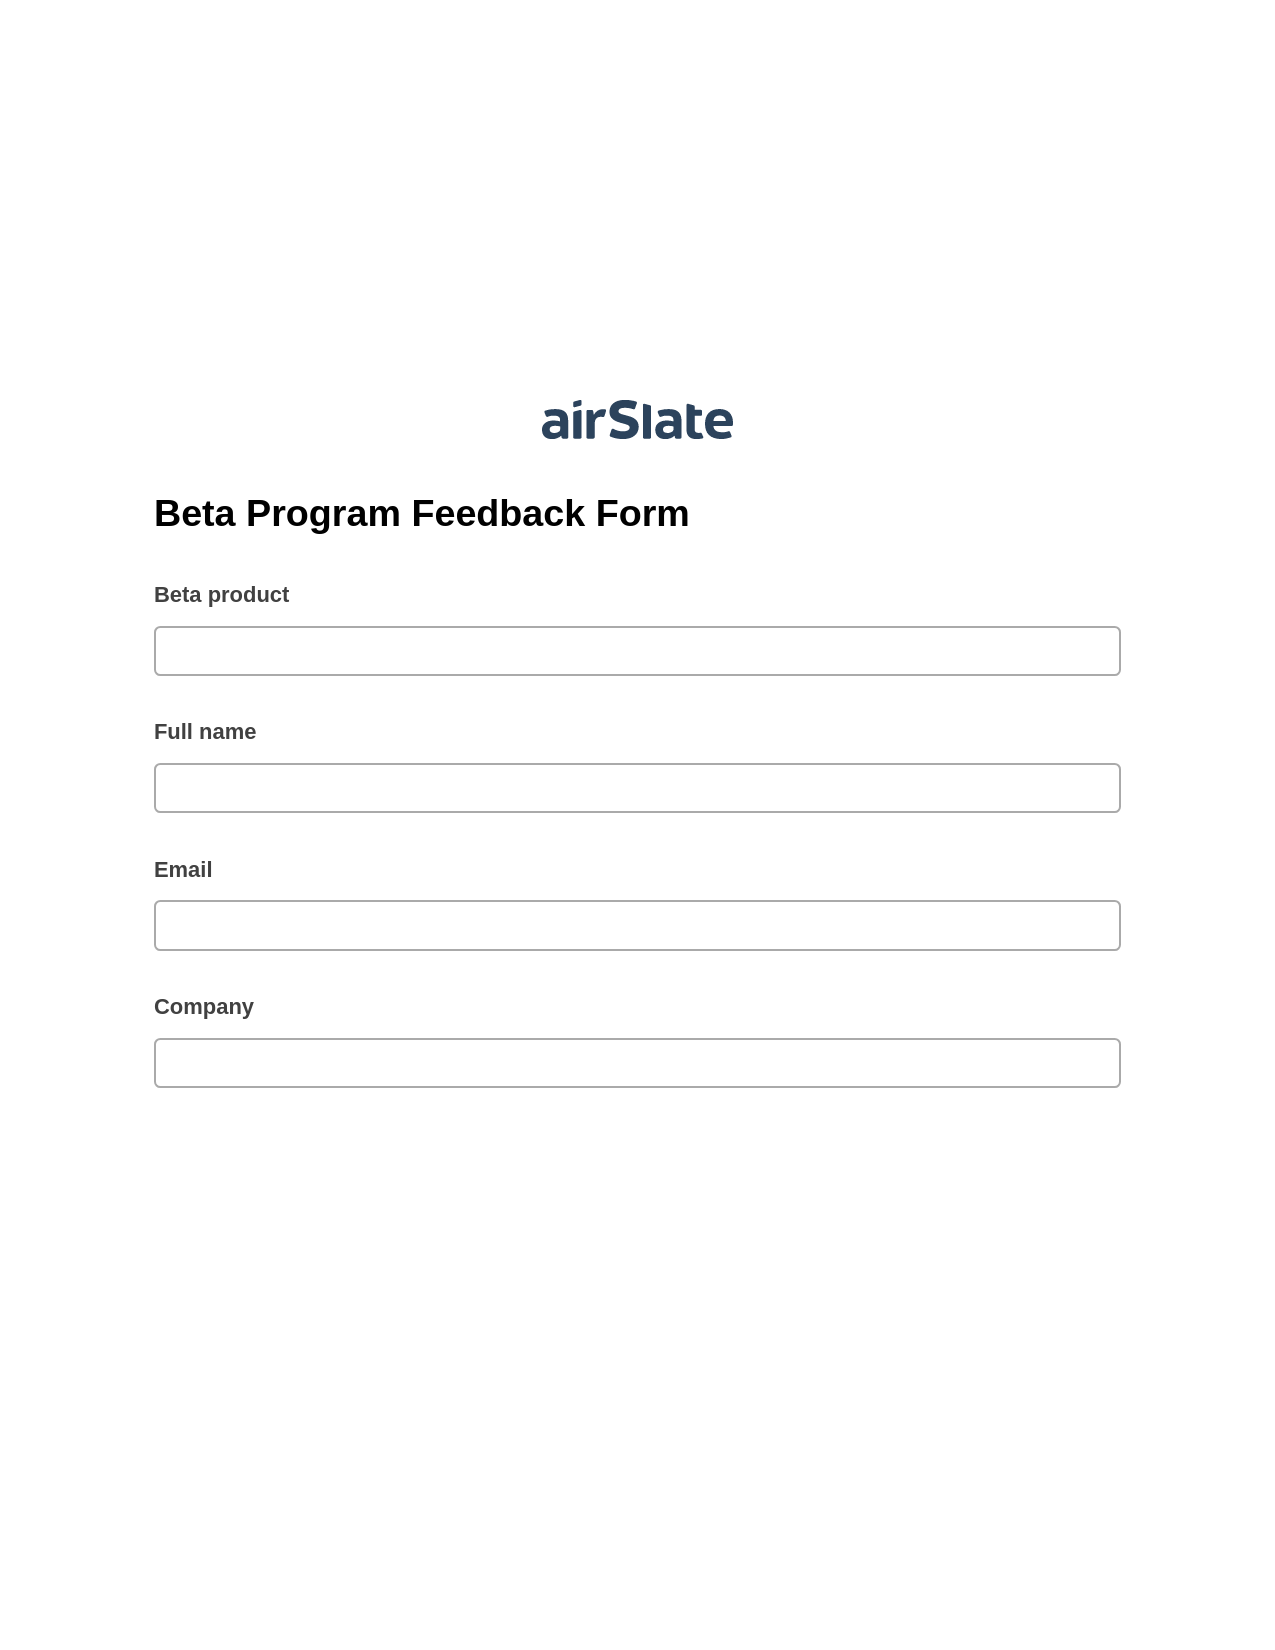 Multirole Beta Program Feedback Form Pre-fill Slate from MS Dynamics 365 Records Bot, Roles Reminder Bot, Email Notification Postfinish Bot